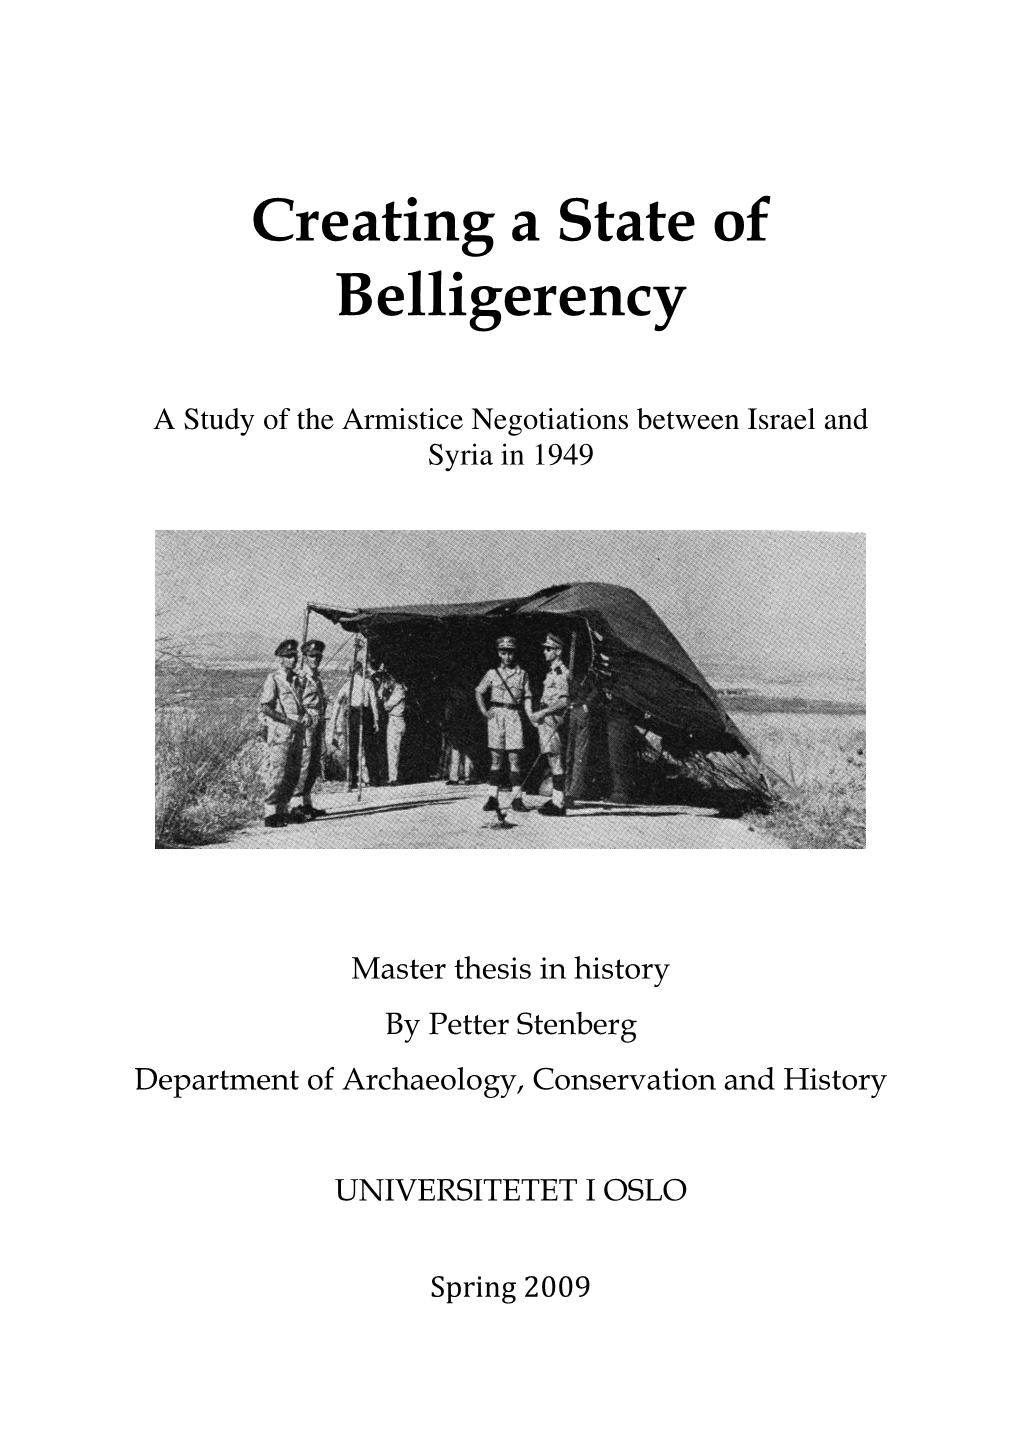 Creating a State of Belligerency